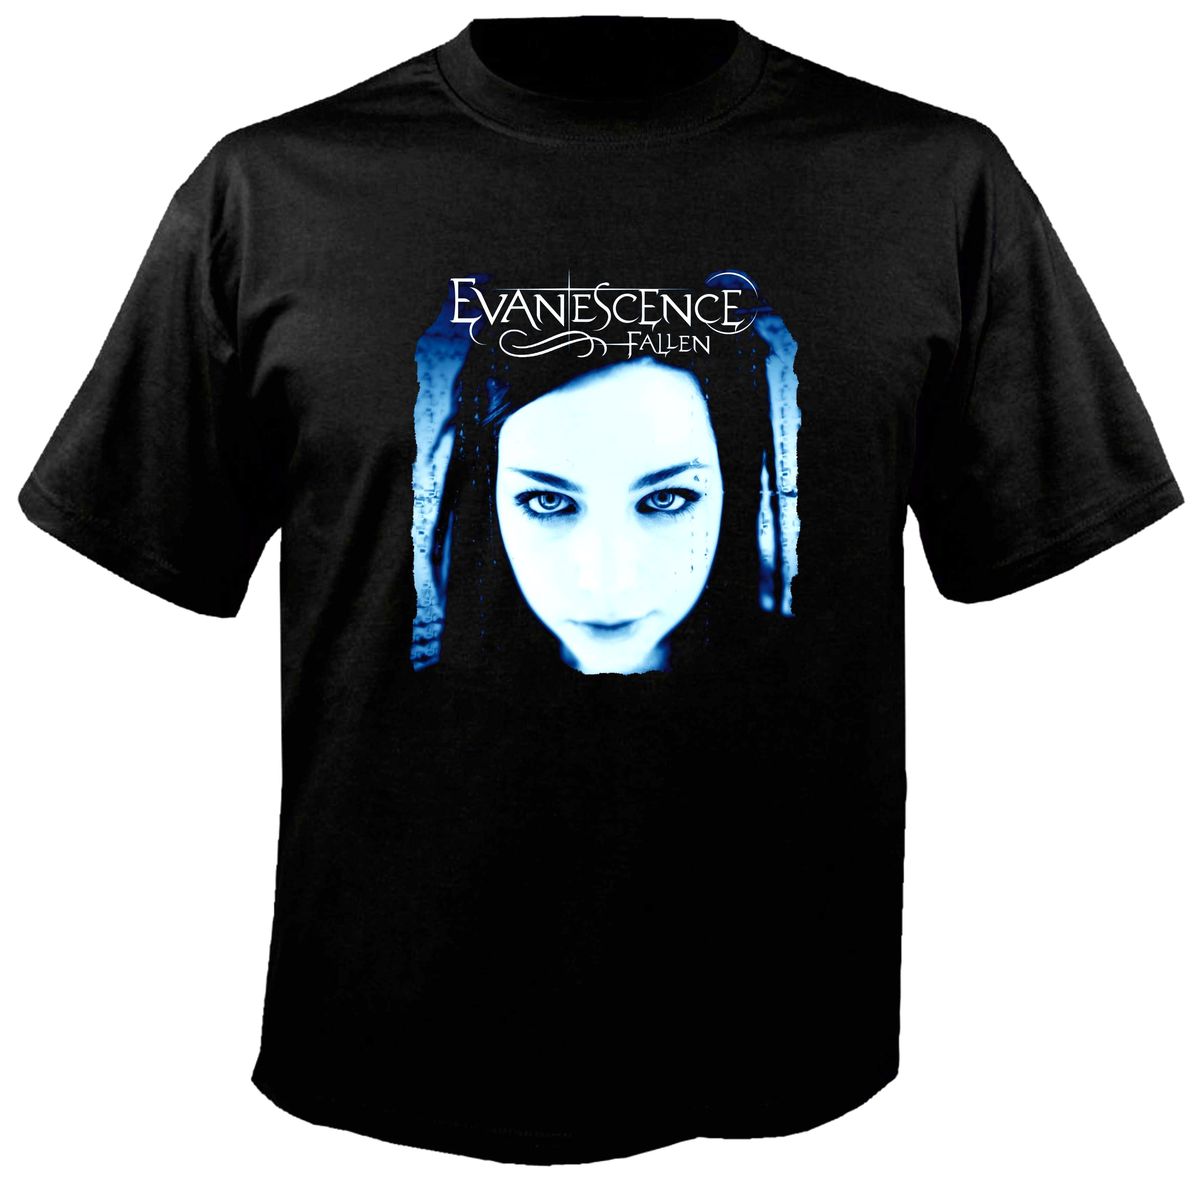 Evanescence Fallen T-Shirt – Metal & Rock T-shirts and Accessories